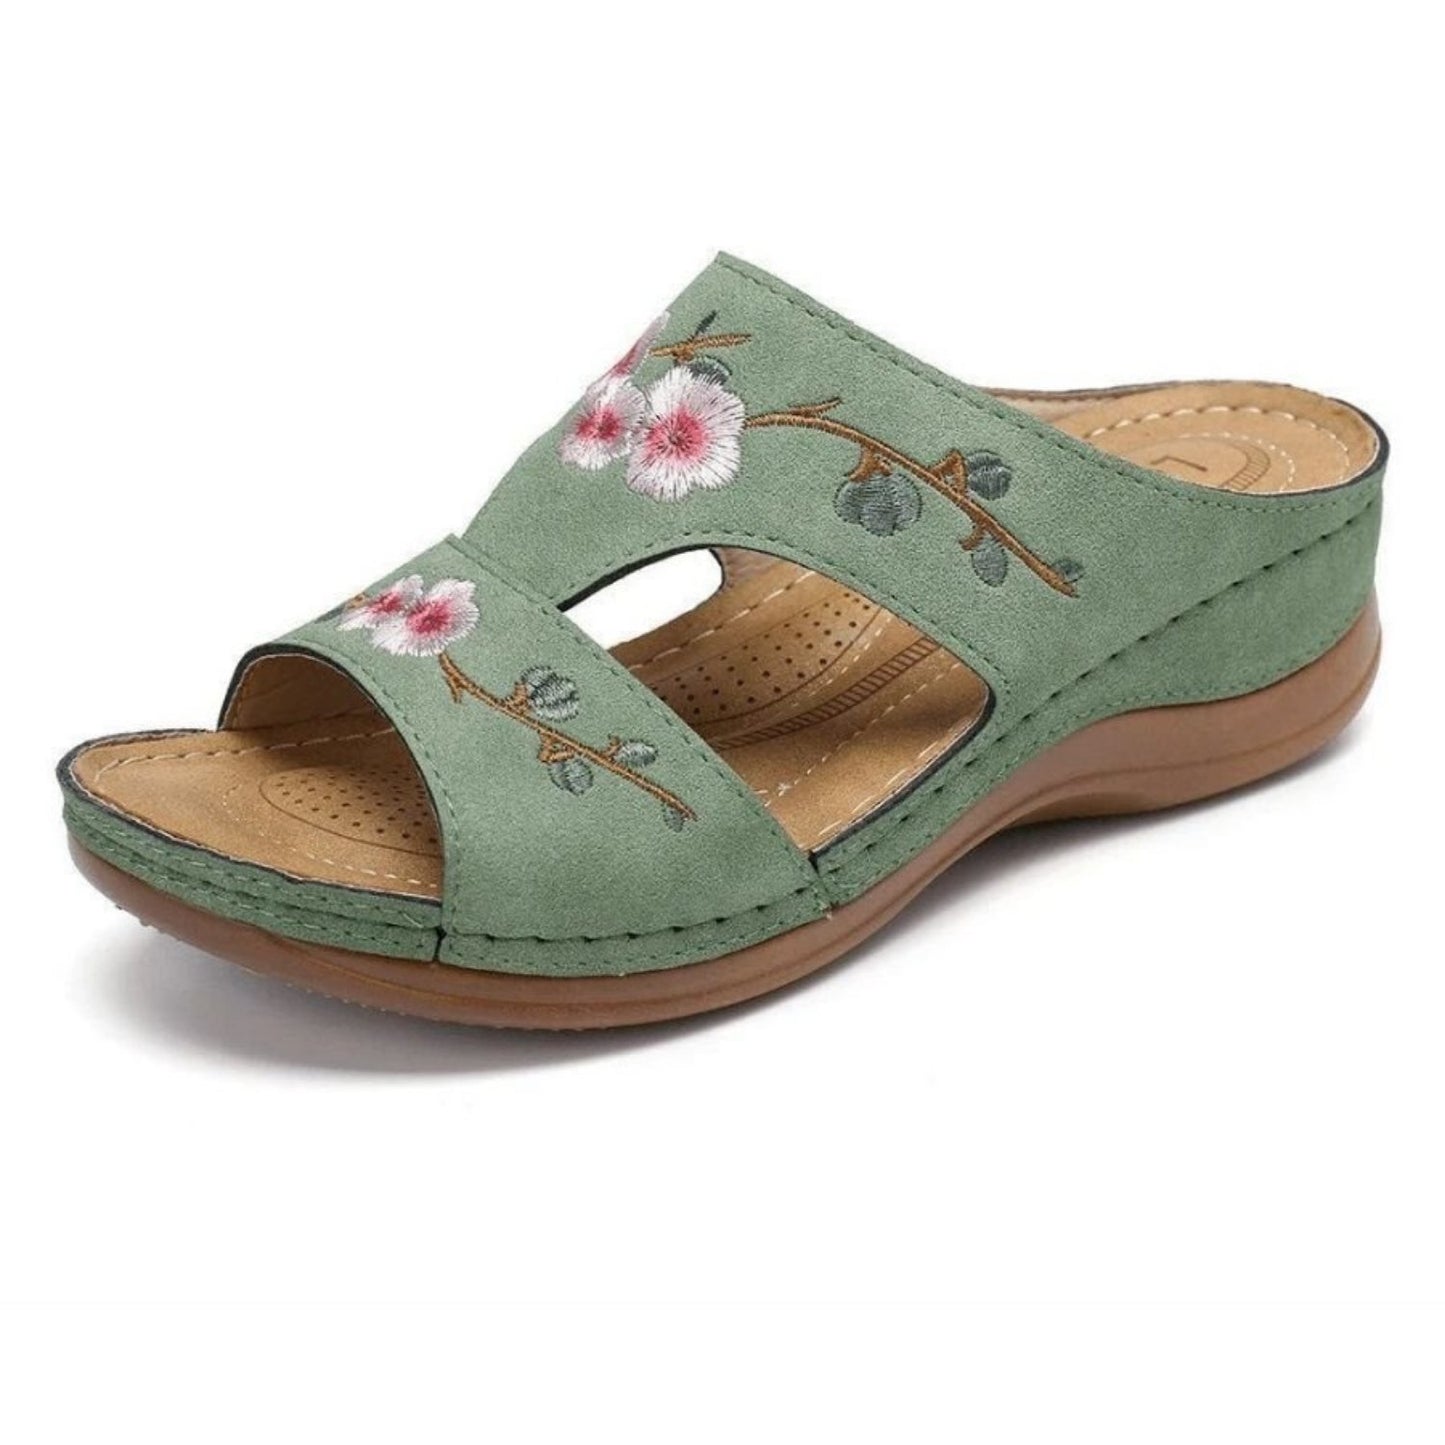 Women's Flower Embroidered Arch Support Vintage Casual Wedges Sandals - Boots BootiesShoescute orthopedic sandalsFlat Sandalsladies sandals